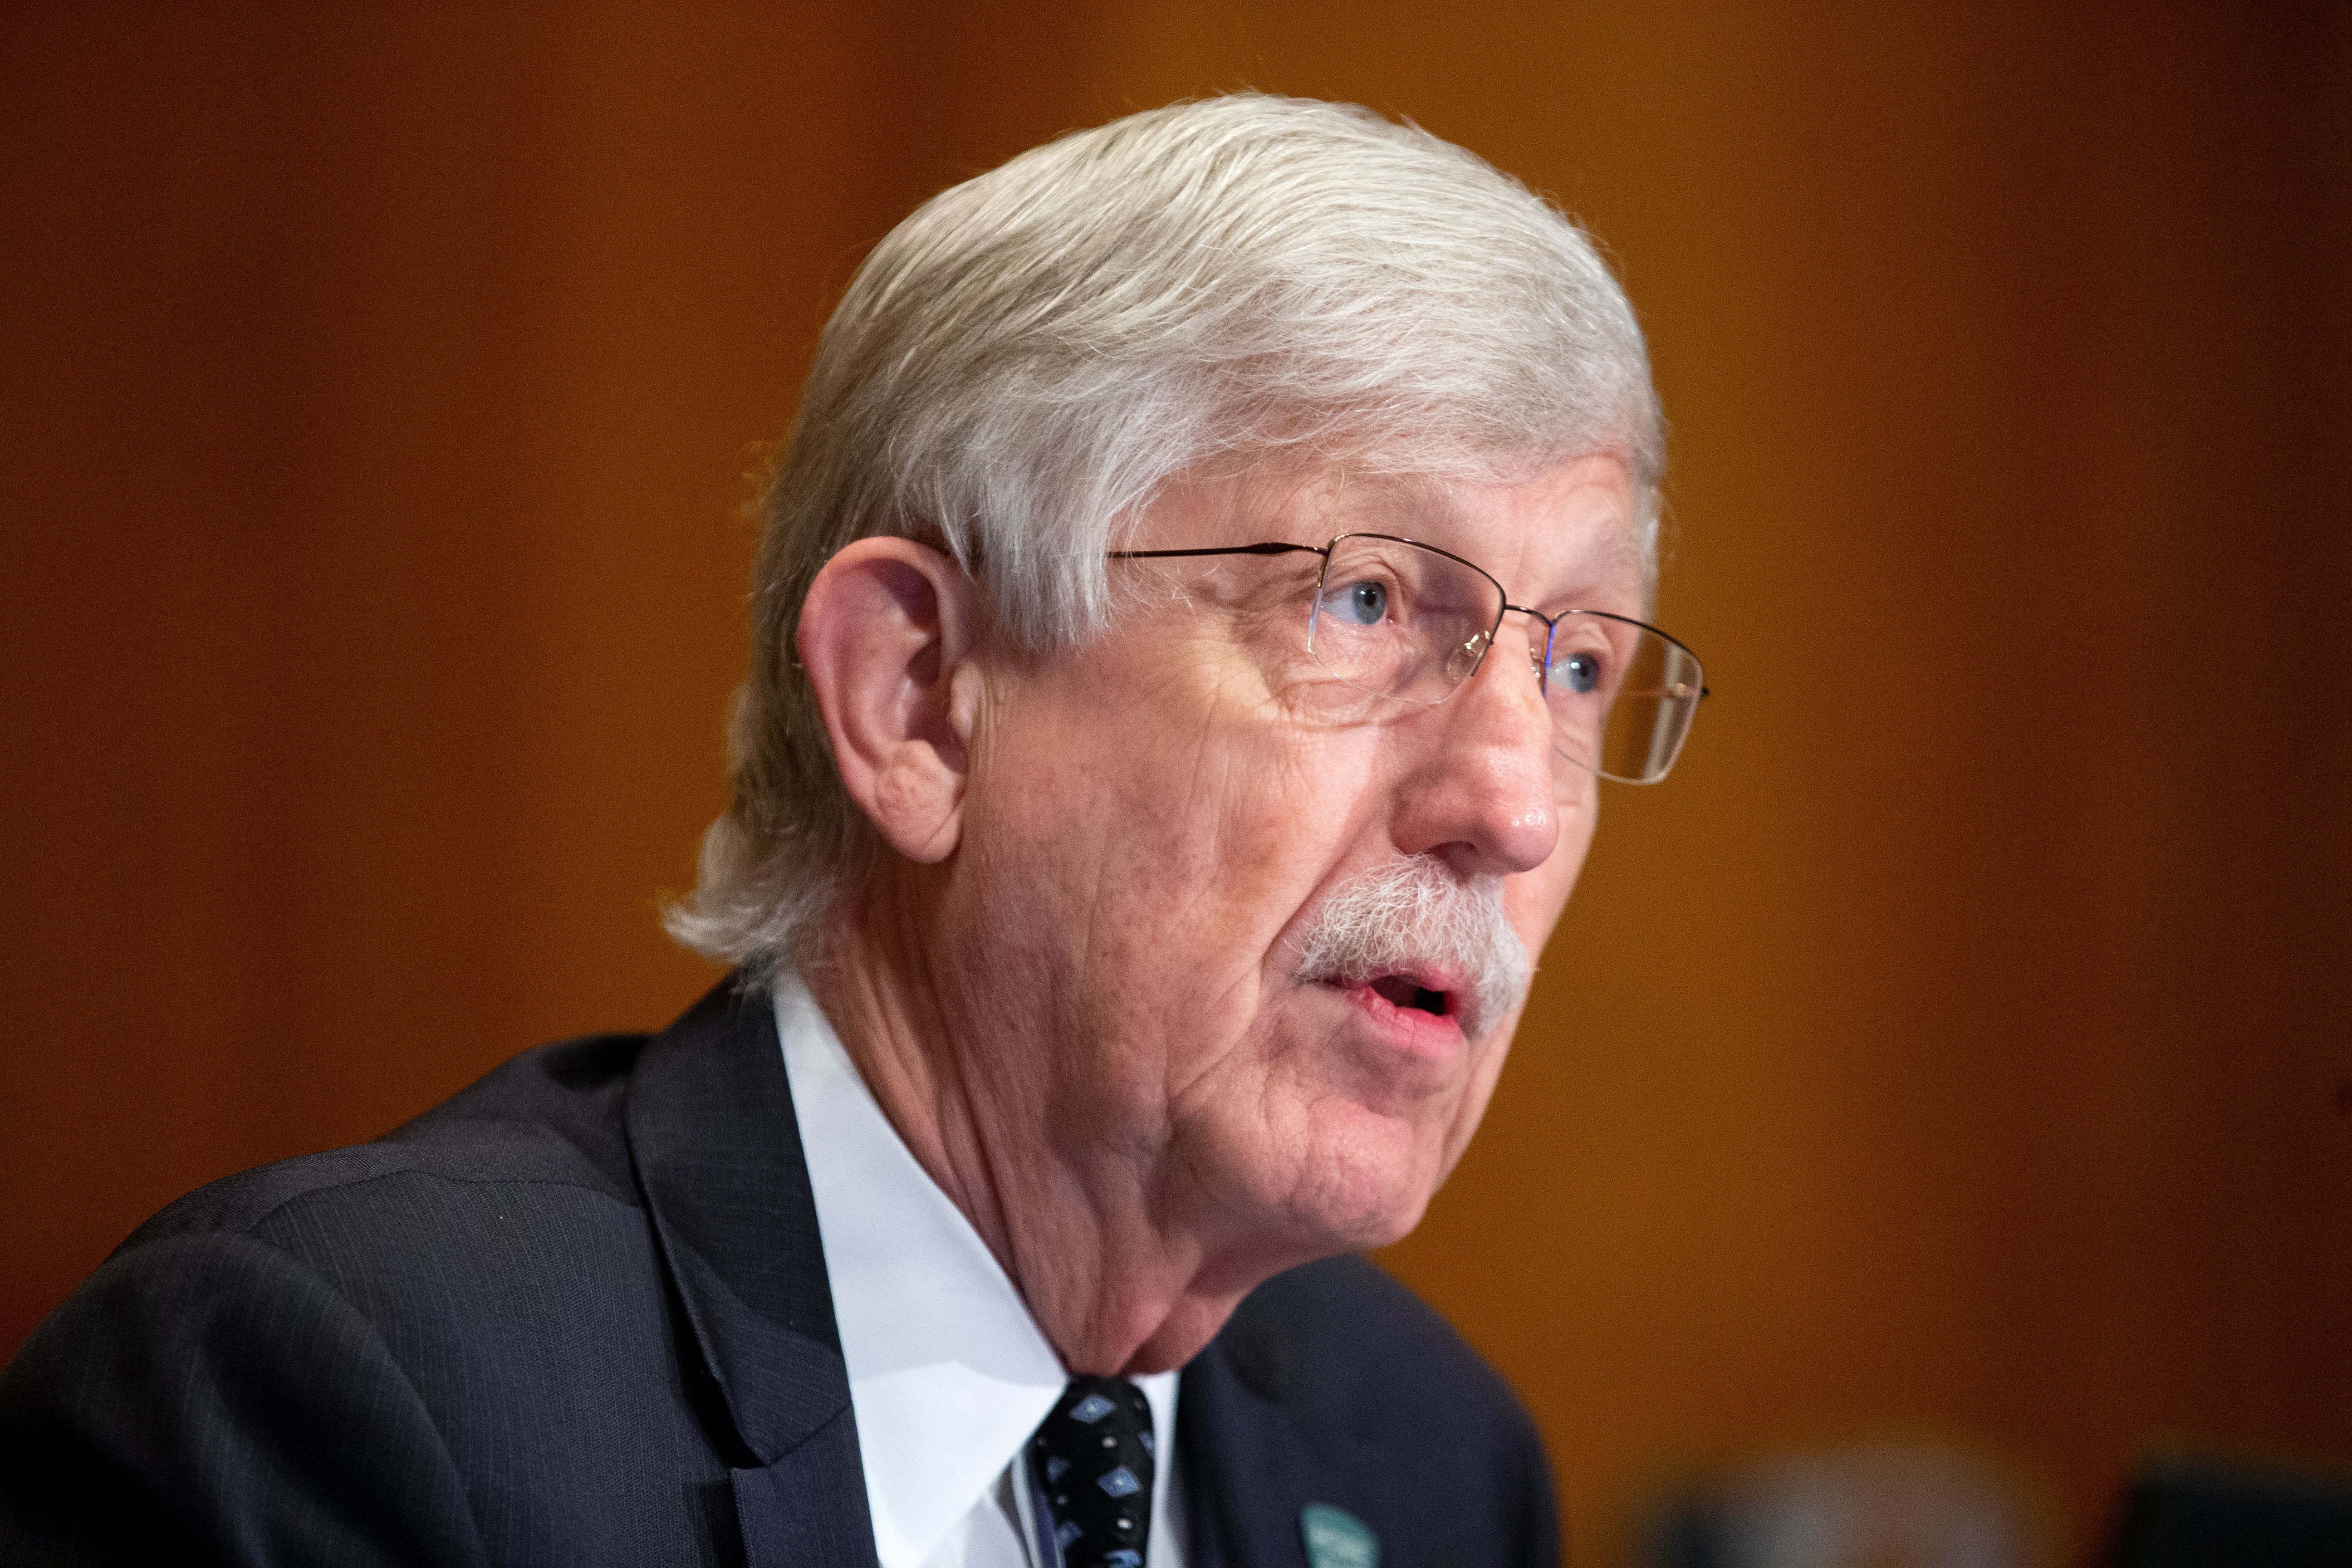 Dr. Francis Collins, director of the US National Institutes of Health, attends a hearing on September 9 in Washington, DC.